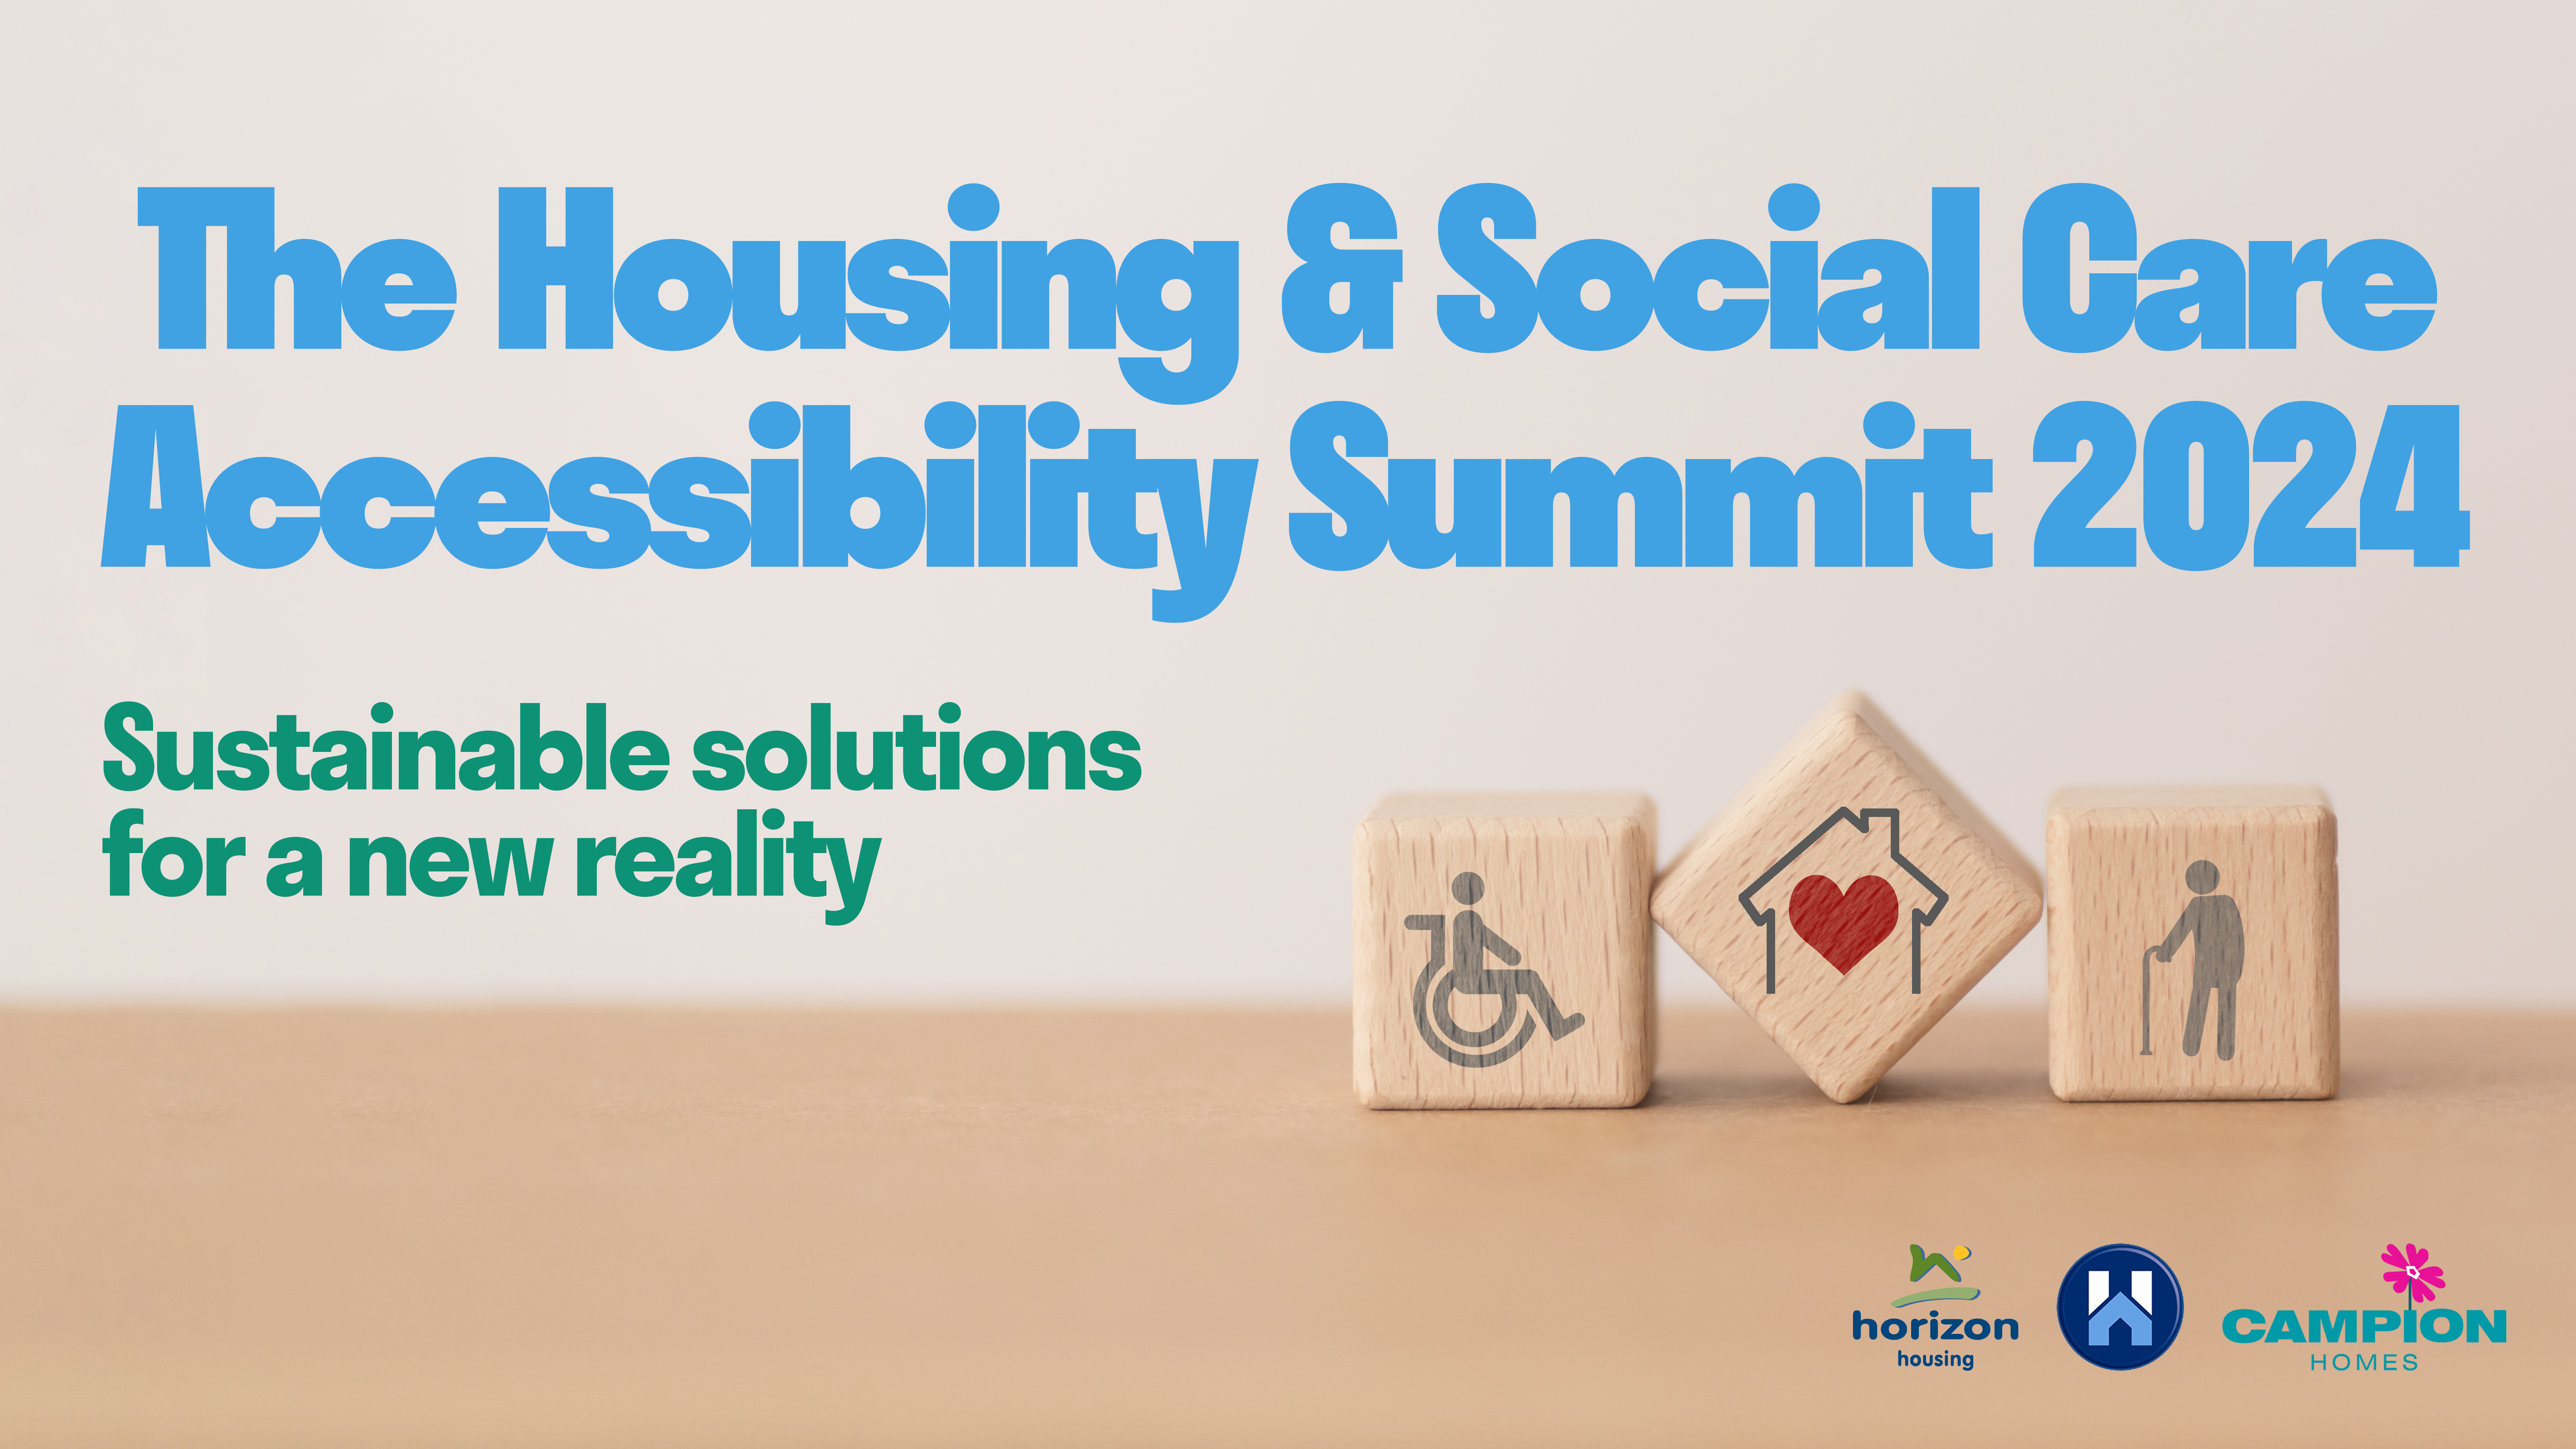 Horizon Housing announces summit to develop solutions for accessible housing and social care crisis